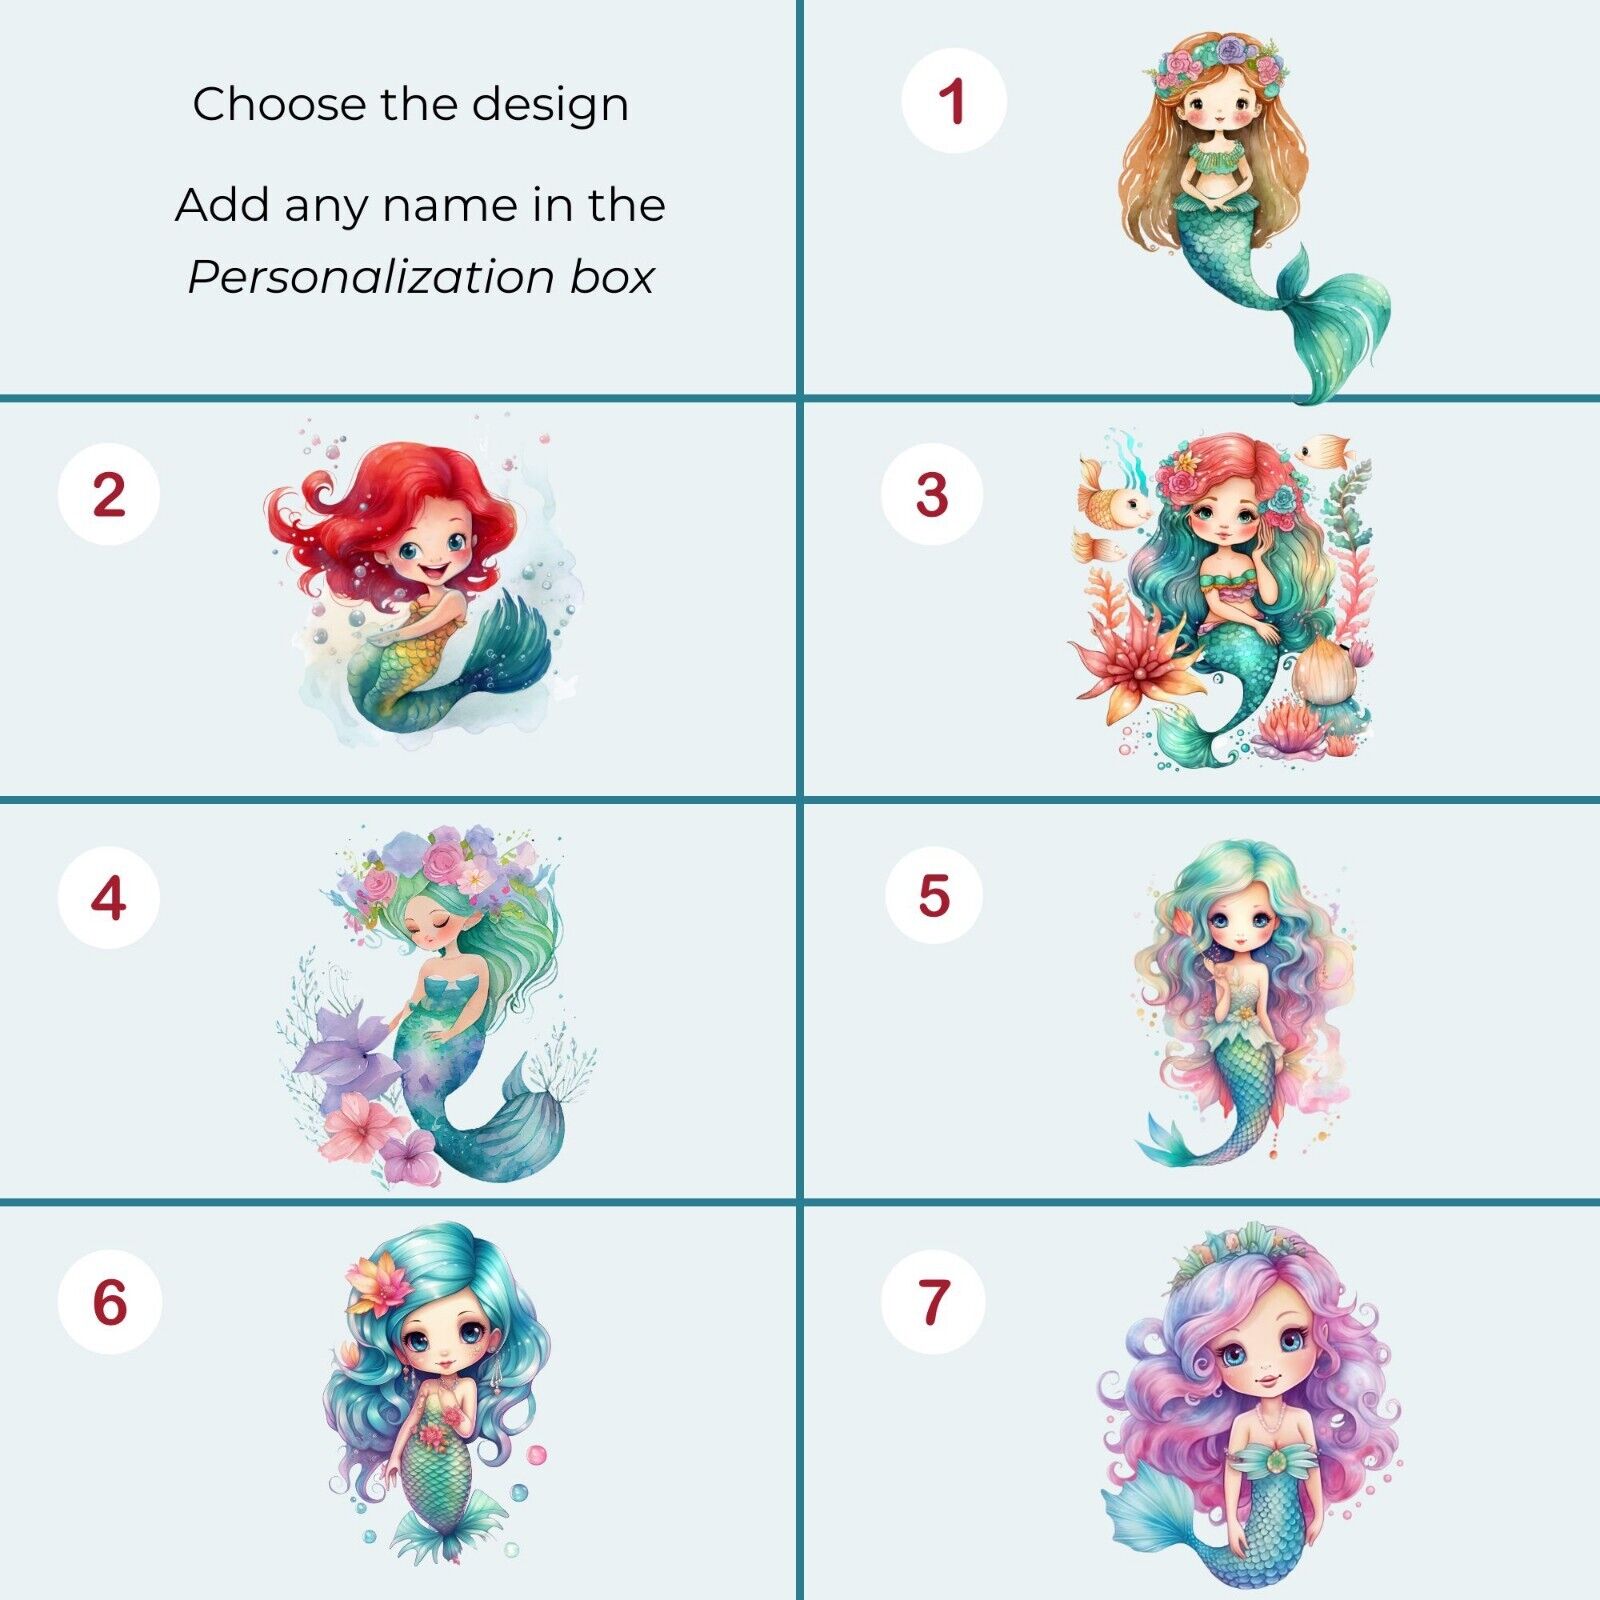 Personalized Acrylic Wood Stand Colorful Mermaid Magical Princess Girls Gift